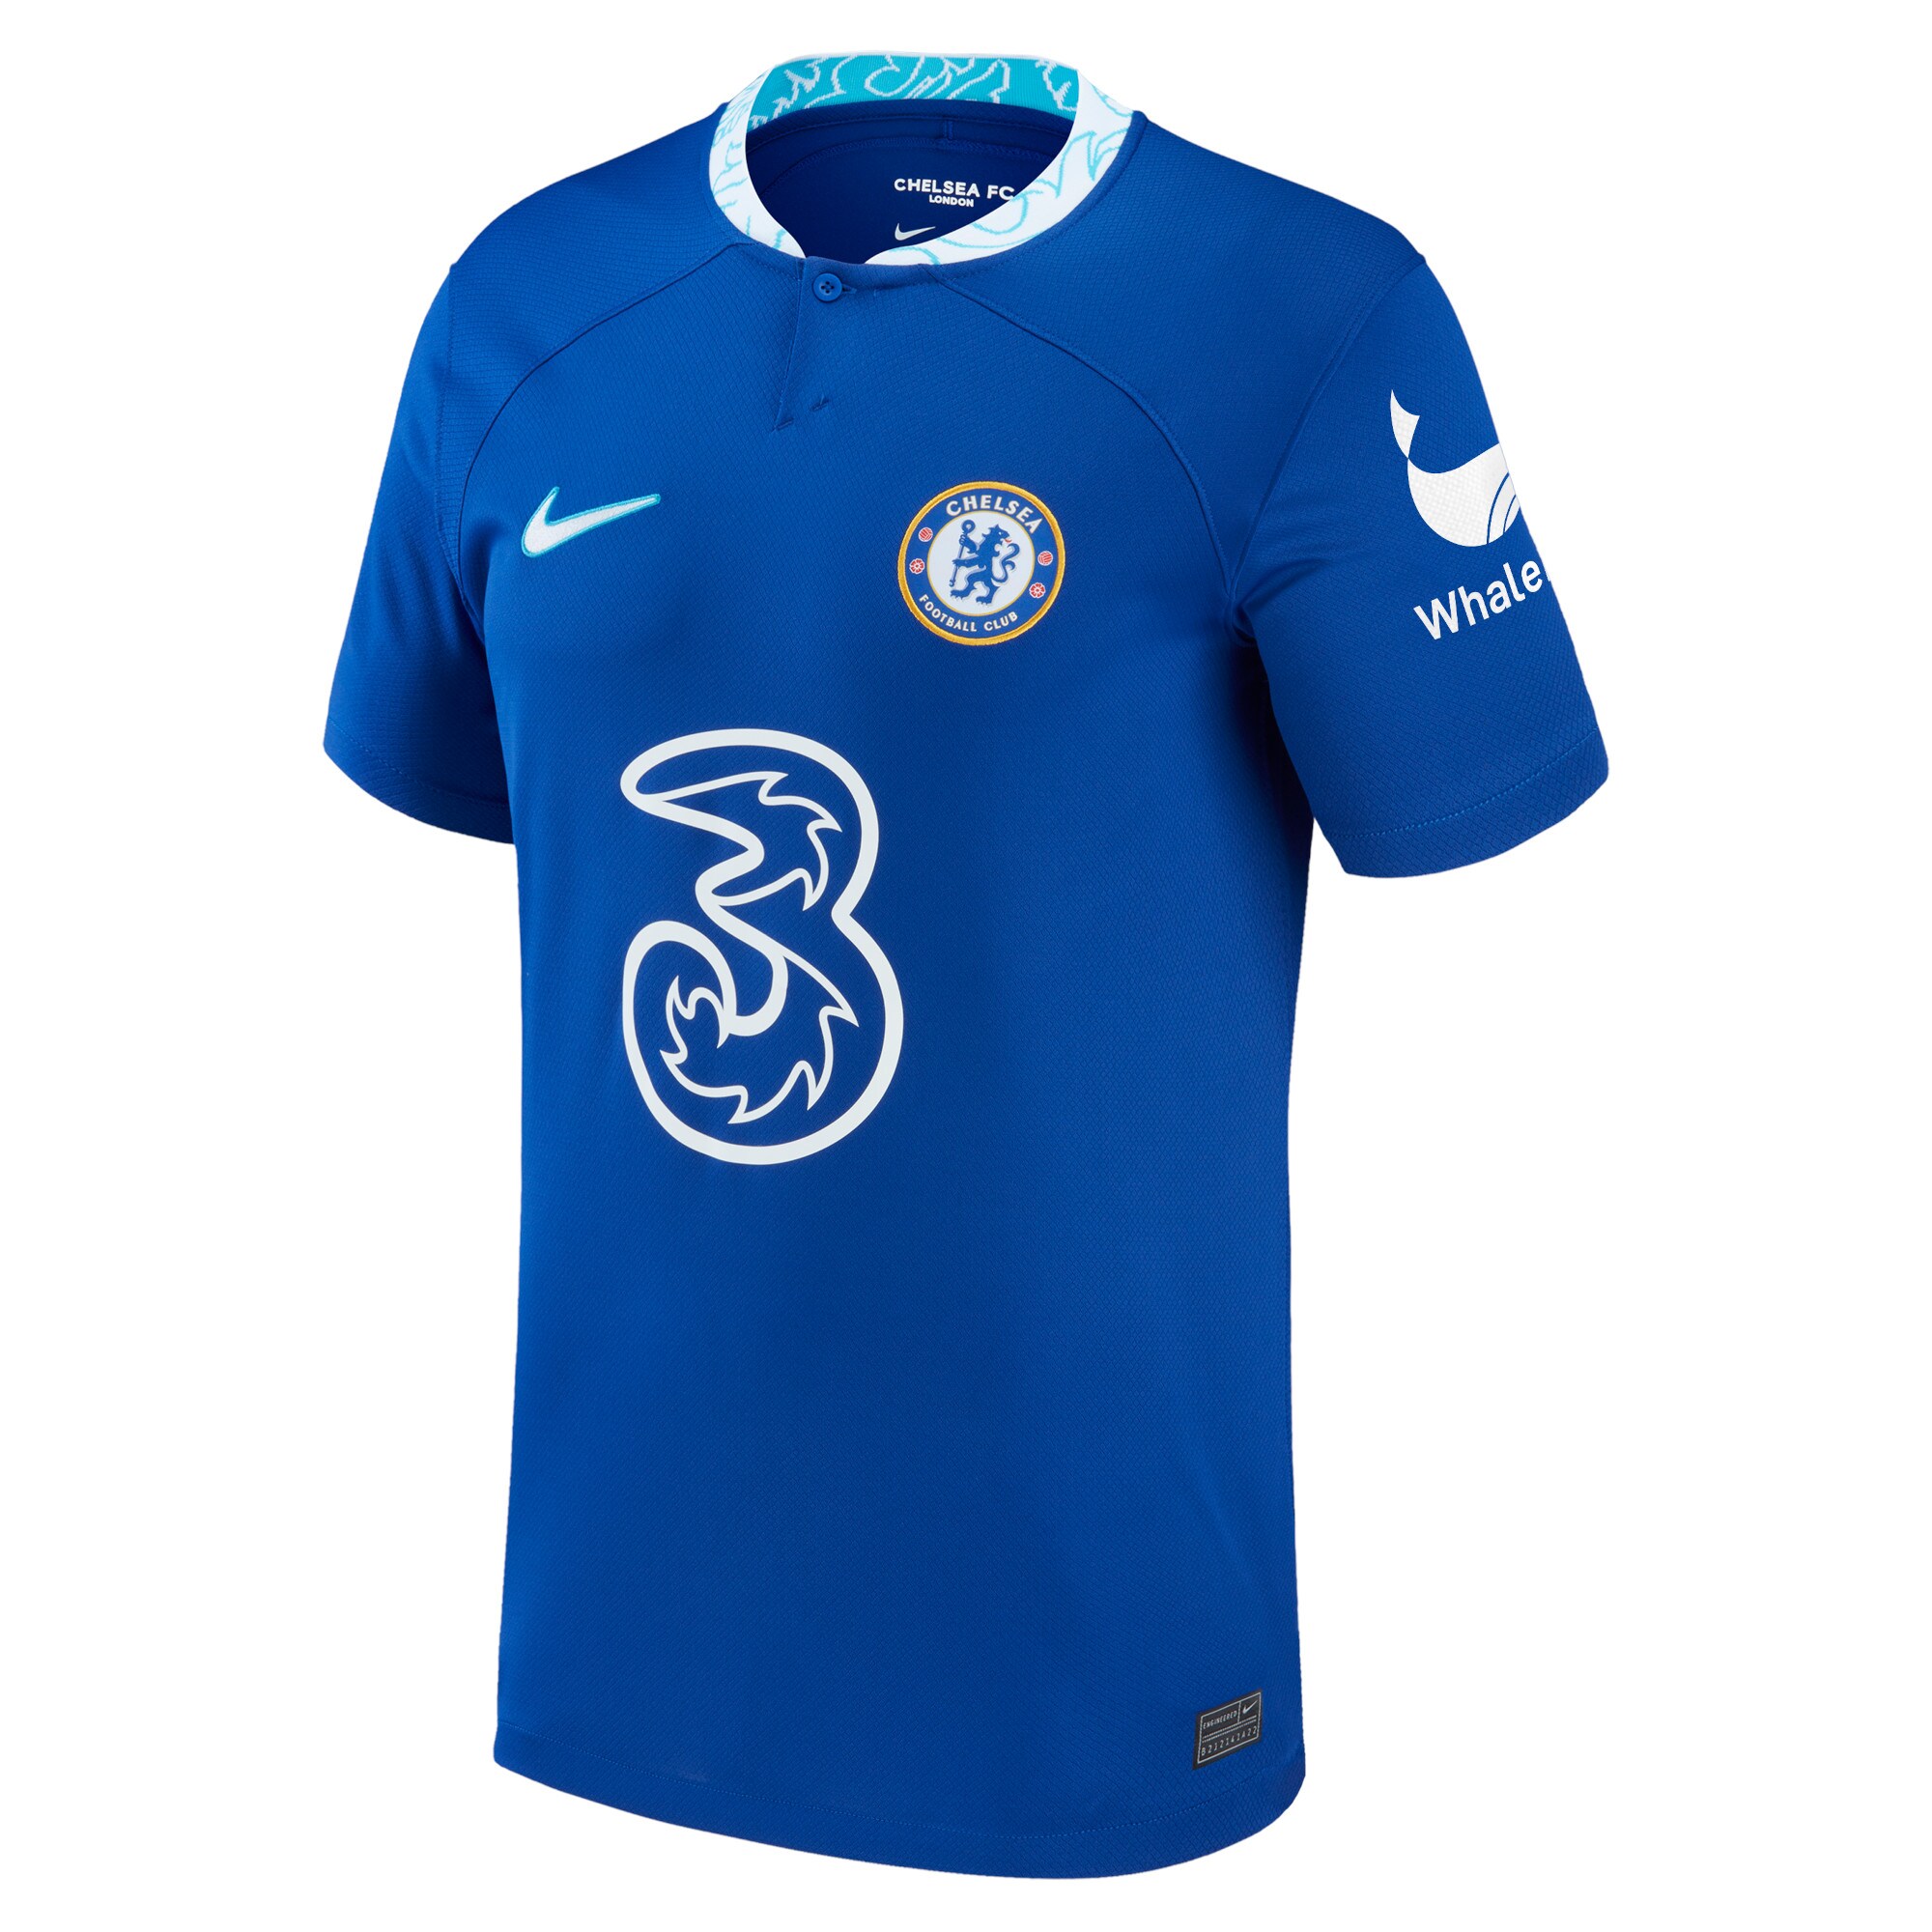 Chelsea WSL Home Stadium Shirt 2022-23 with Kaneyrd 19 printing